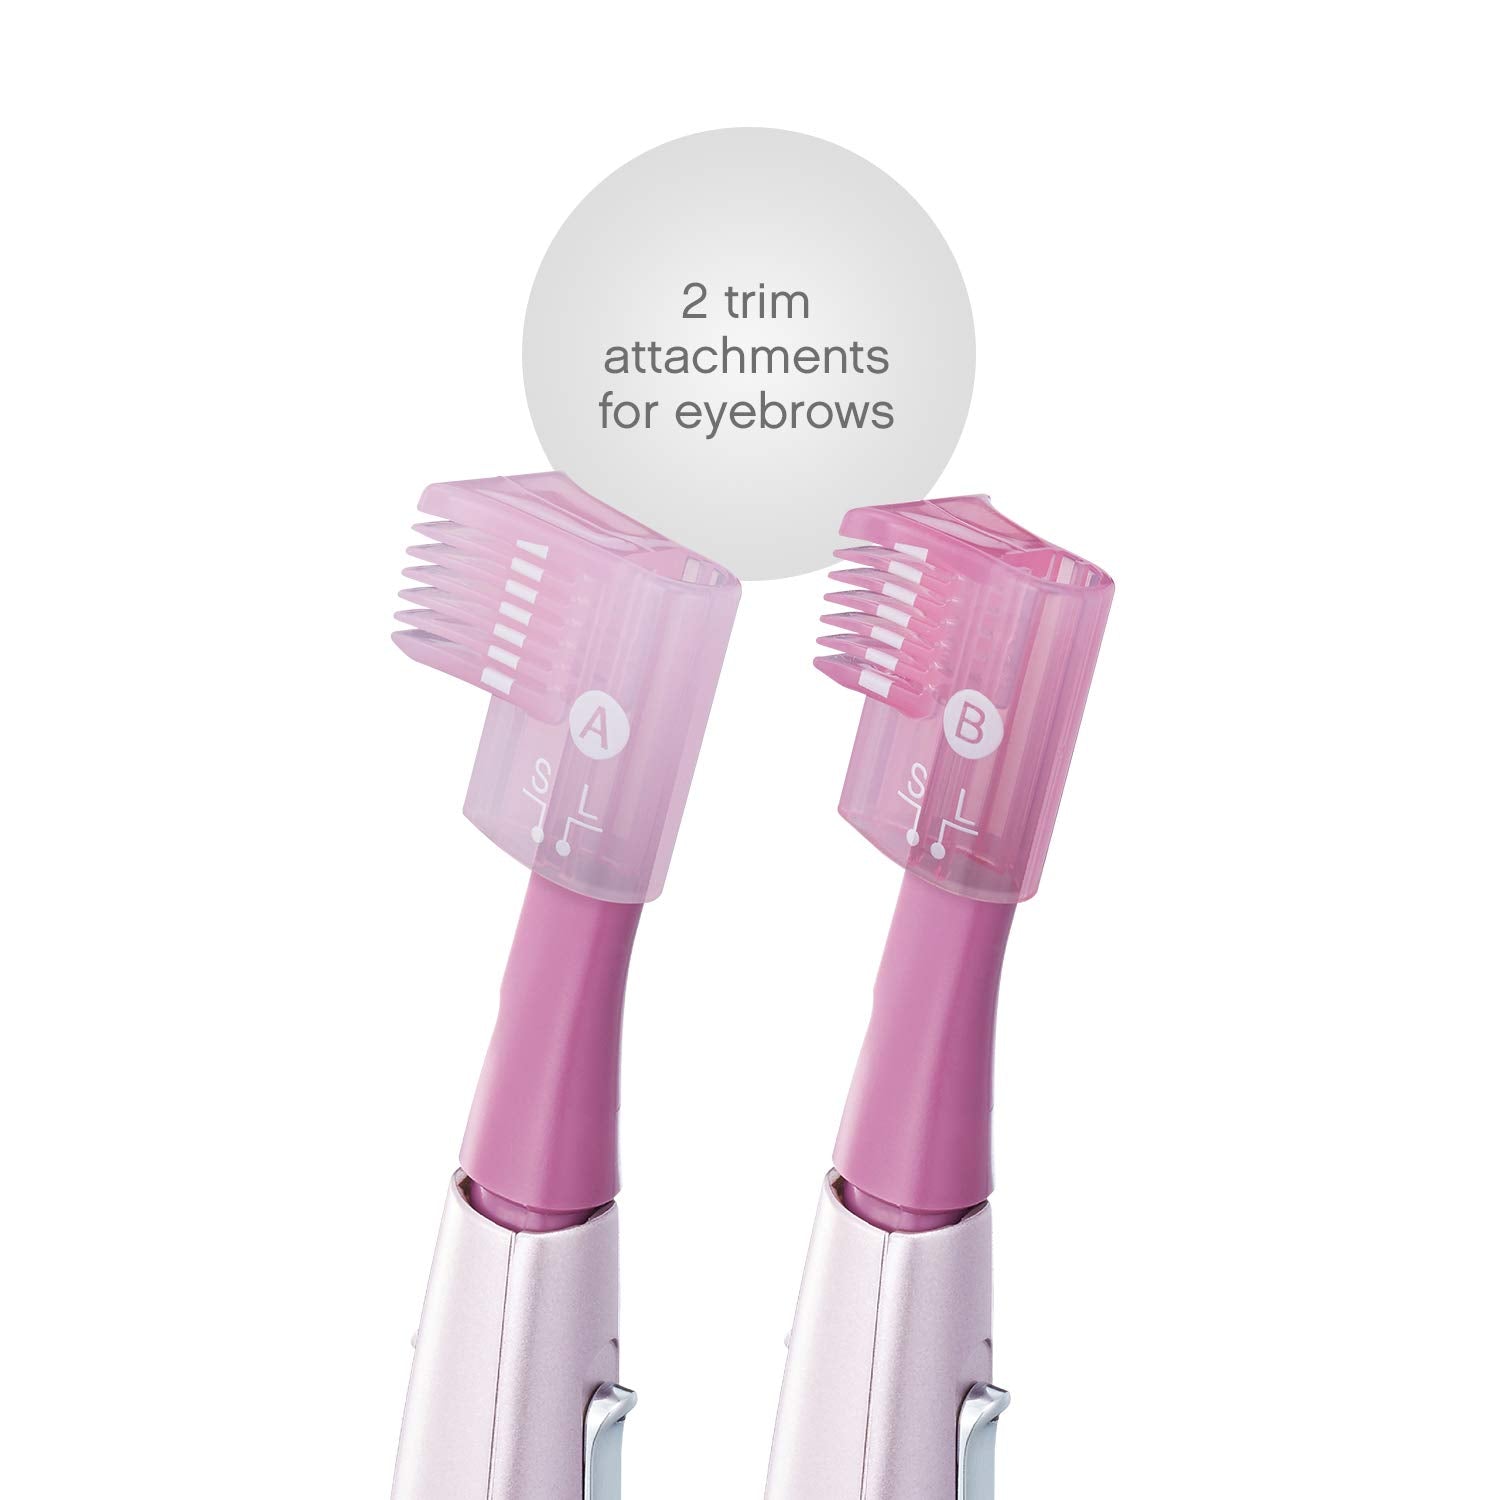 Panasonic Women’s Facial Hair Remover and Eyebrow Trimmer with Pivoting Head, Includes 2 Gentle Blades for Brow and Face and 2 Eyebrow Trim Attachments, Battery-Operated – ES2113PC : Beauty & Personal Care